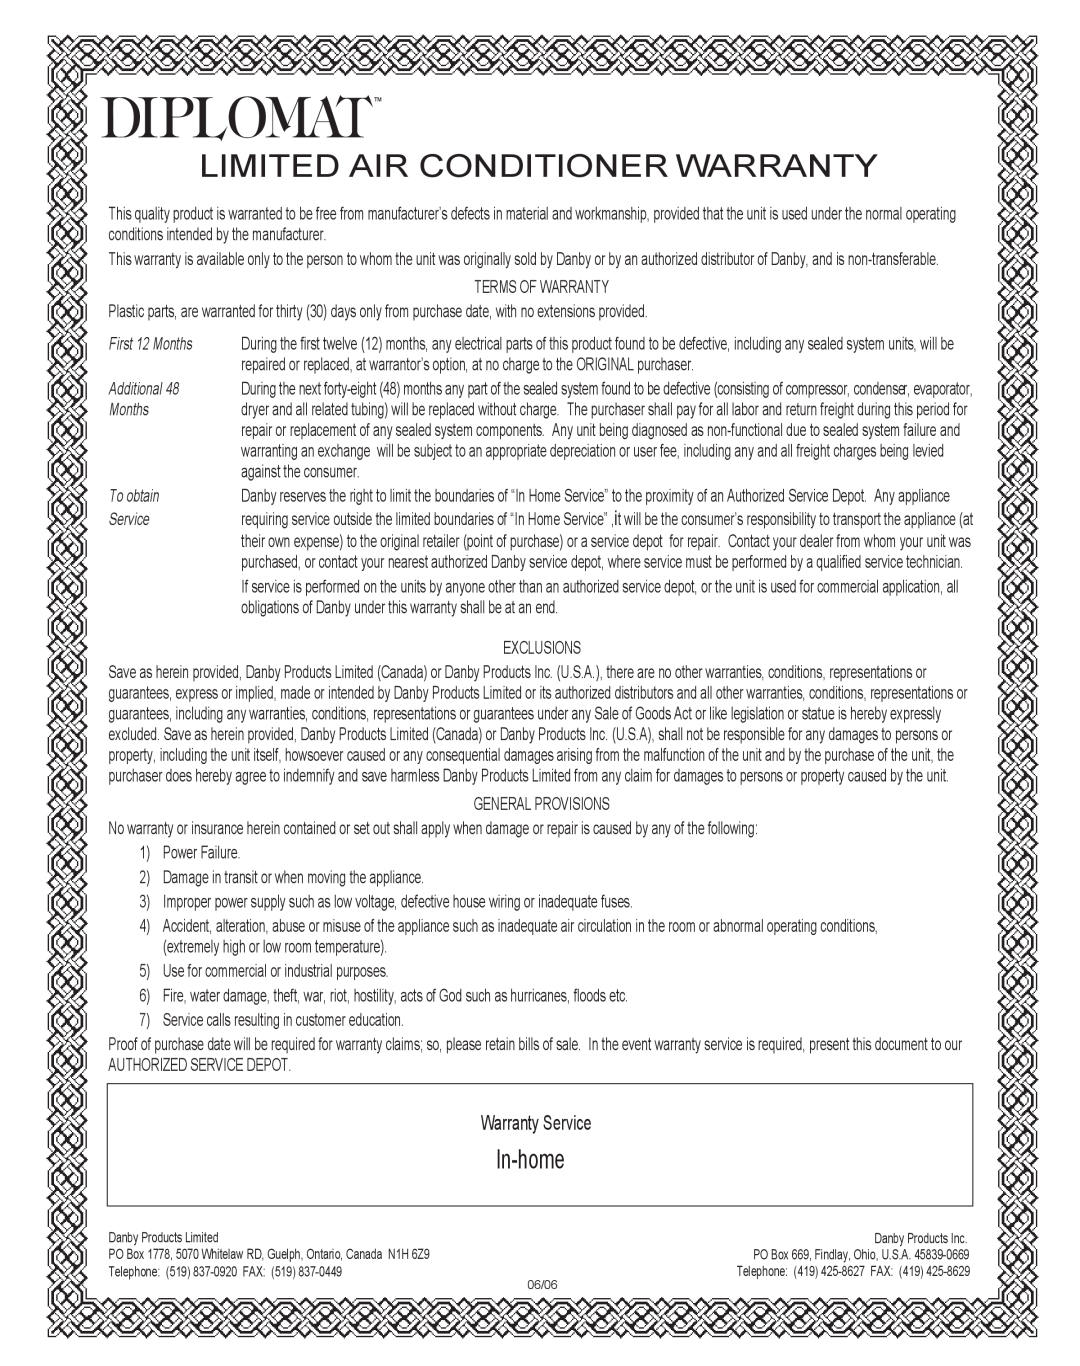 Danby DAC7037M Limited Air Conditioner Warranty, In-home, First 12 Months, Additional, To obtain, Service 